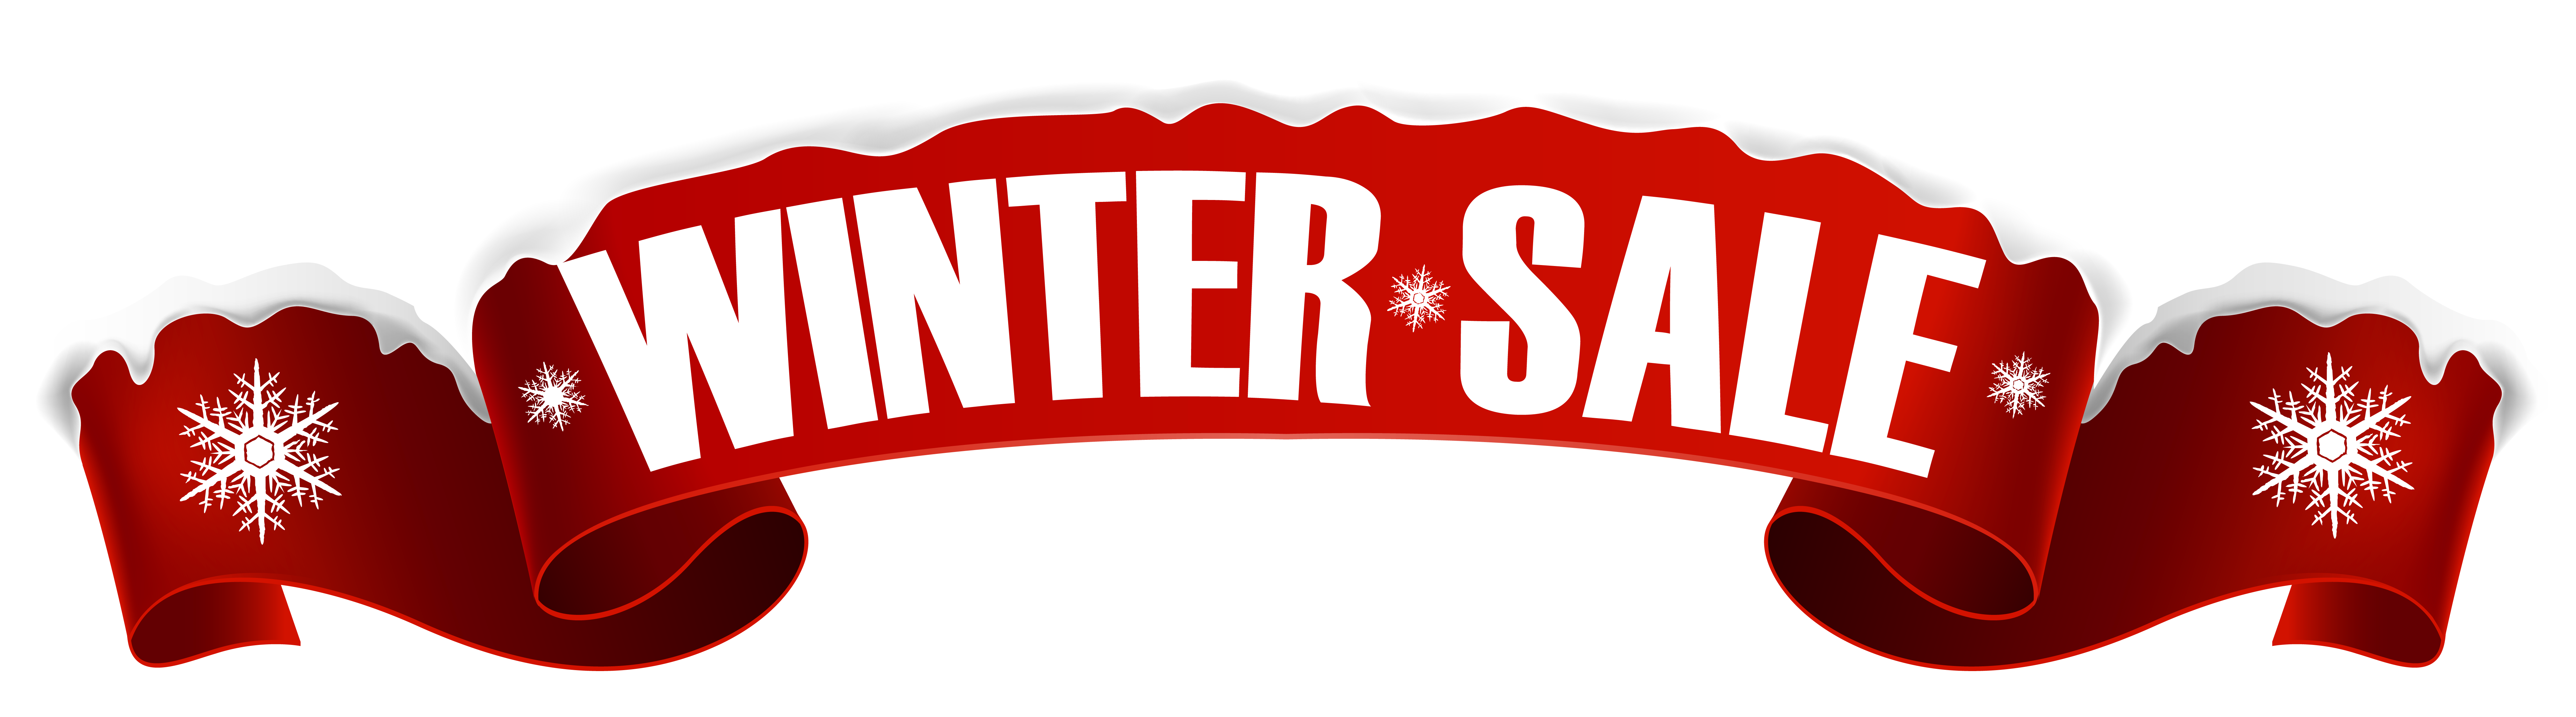 https://gallery.yopriceville.com/var/albums/Free-Clipart-Pictures/Sale-Stickers-PNG/Winter_Sale_Banner_Transparent_PNG_Clip_Art_Image.png?m=1449460501